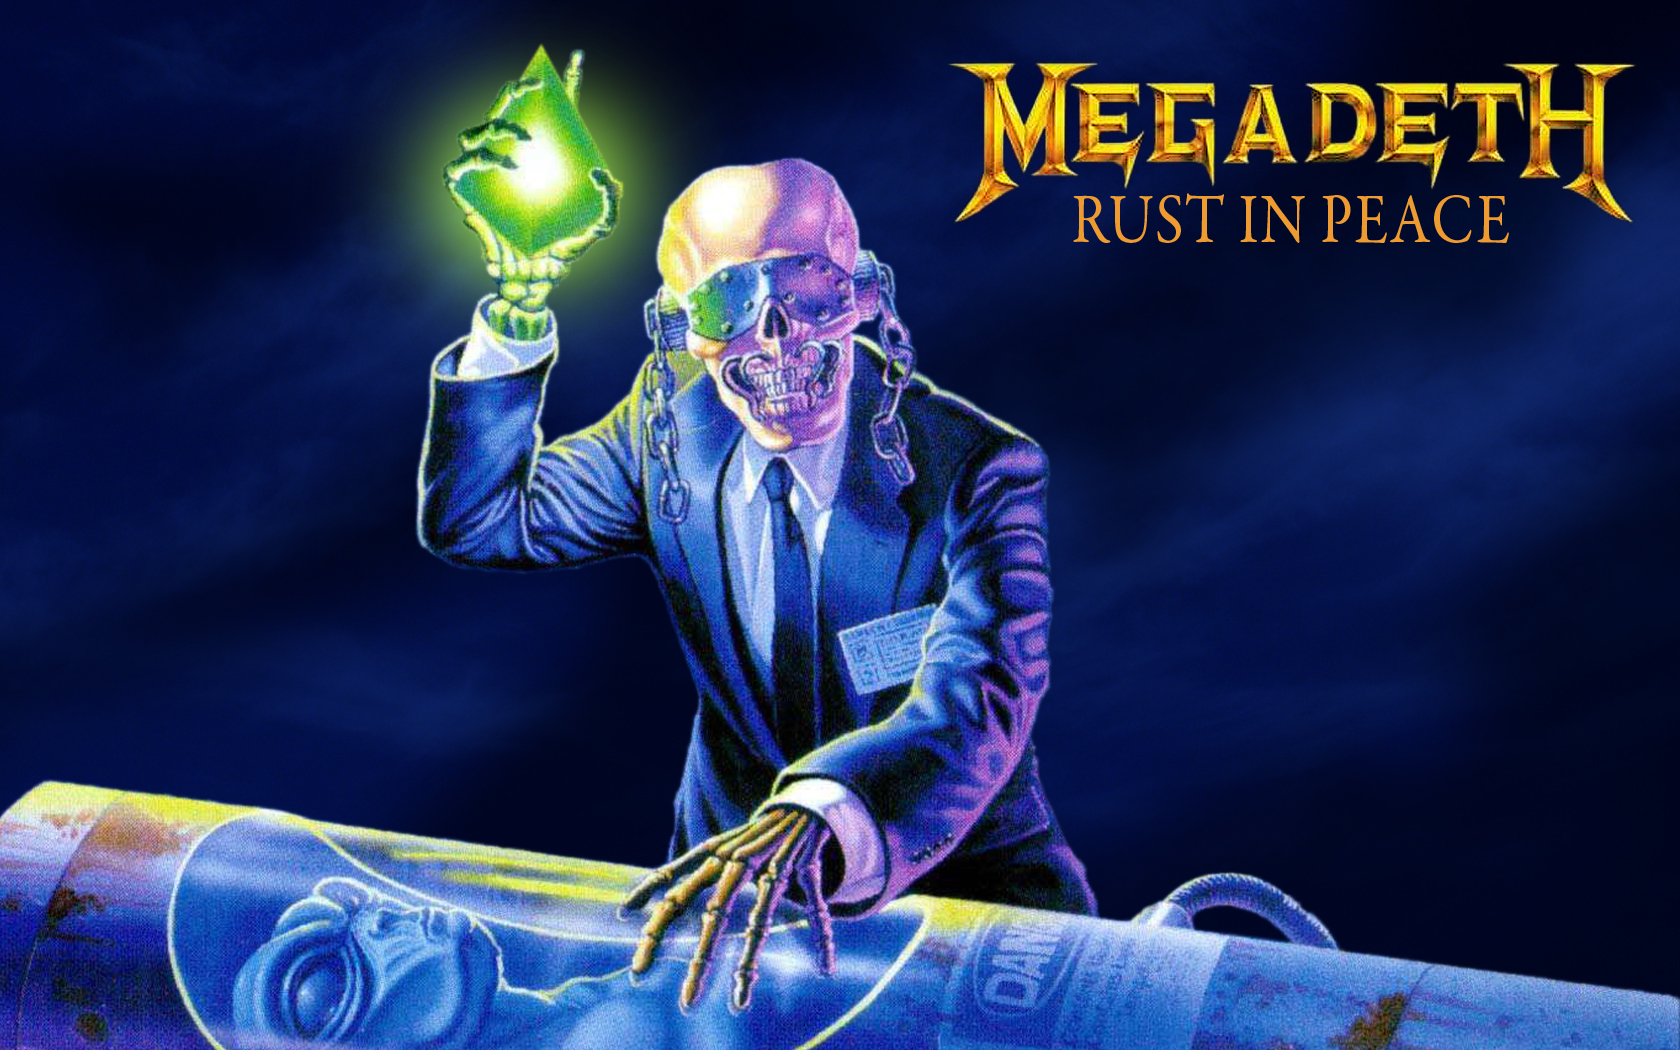 Free Download Megadeth Images Rust In Peace Wallpaper Wallpaper Photos 1680x1050 For Your Desktop Mobile Tablet Explore 73 Megadeth Wallpaper Megadeth Wallpaper Hd 1080p Megadeth Dystopia Wallpaper Vic Rattlehead Wallpaper